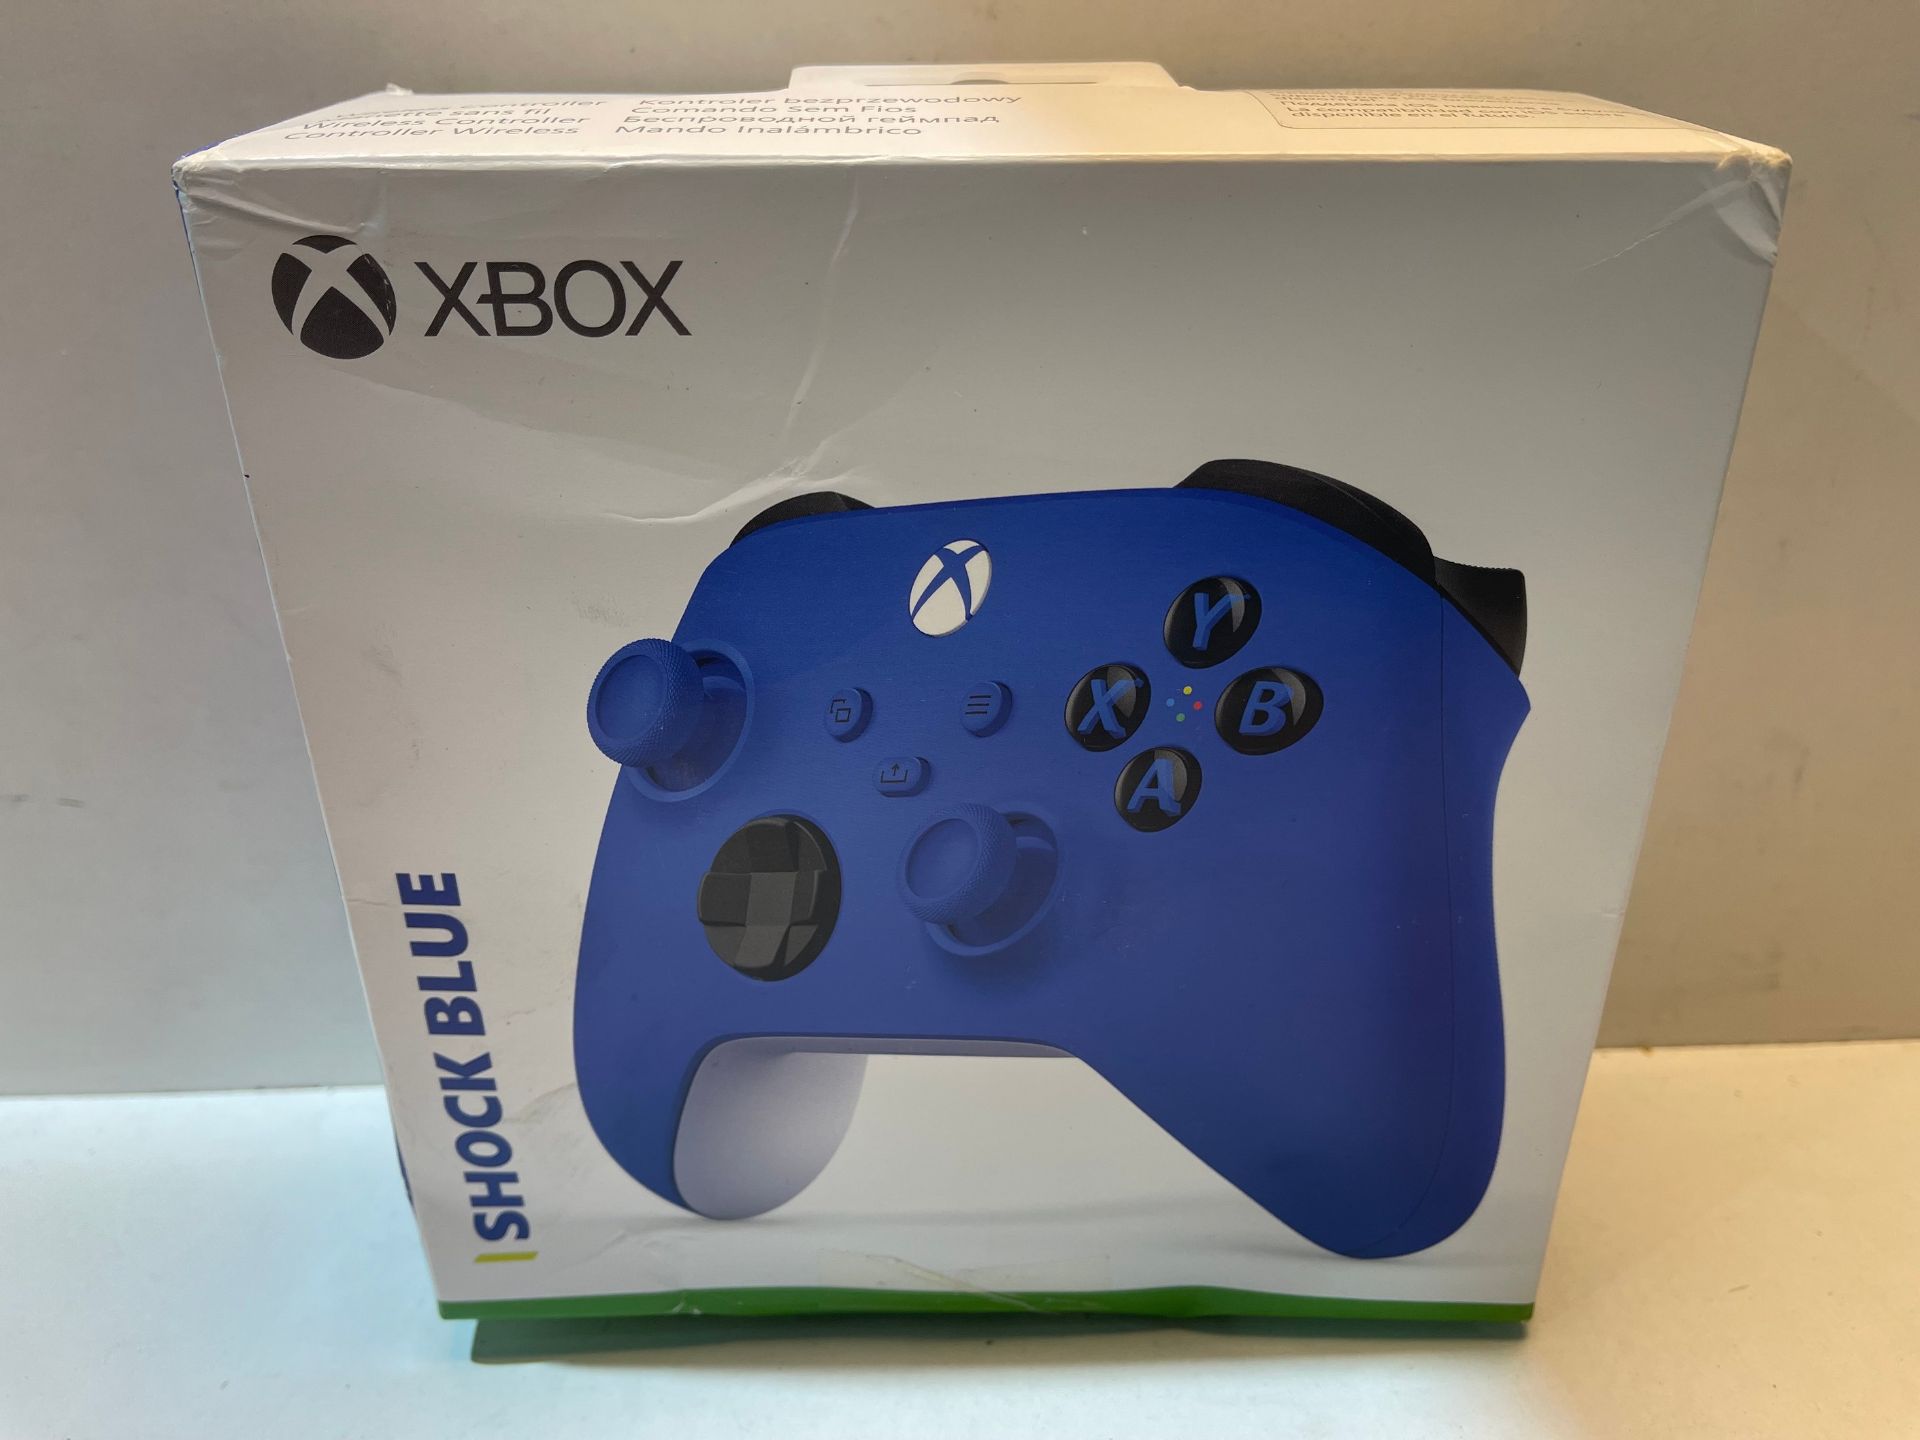 Xbox Wireless Controller – Shock Blue £52.99Condition ReportAppraisal Available on Request- All